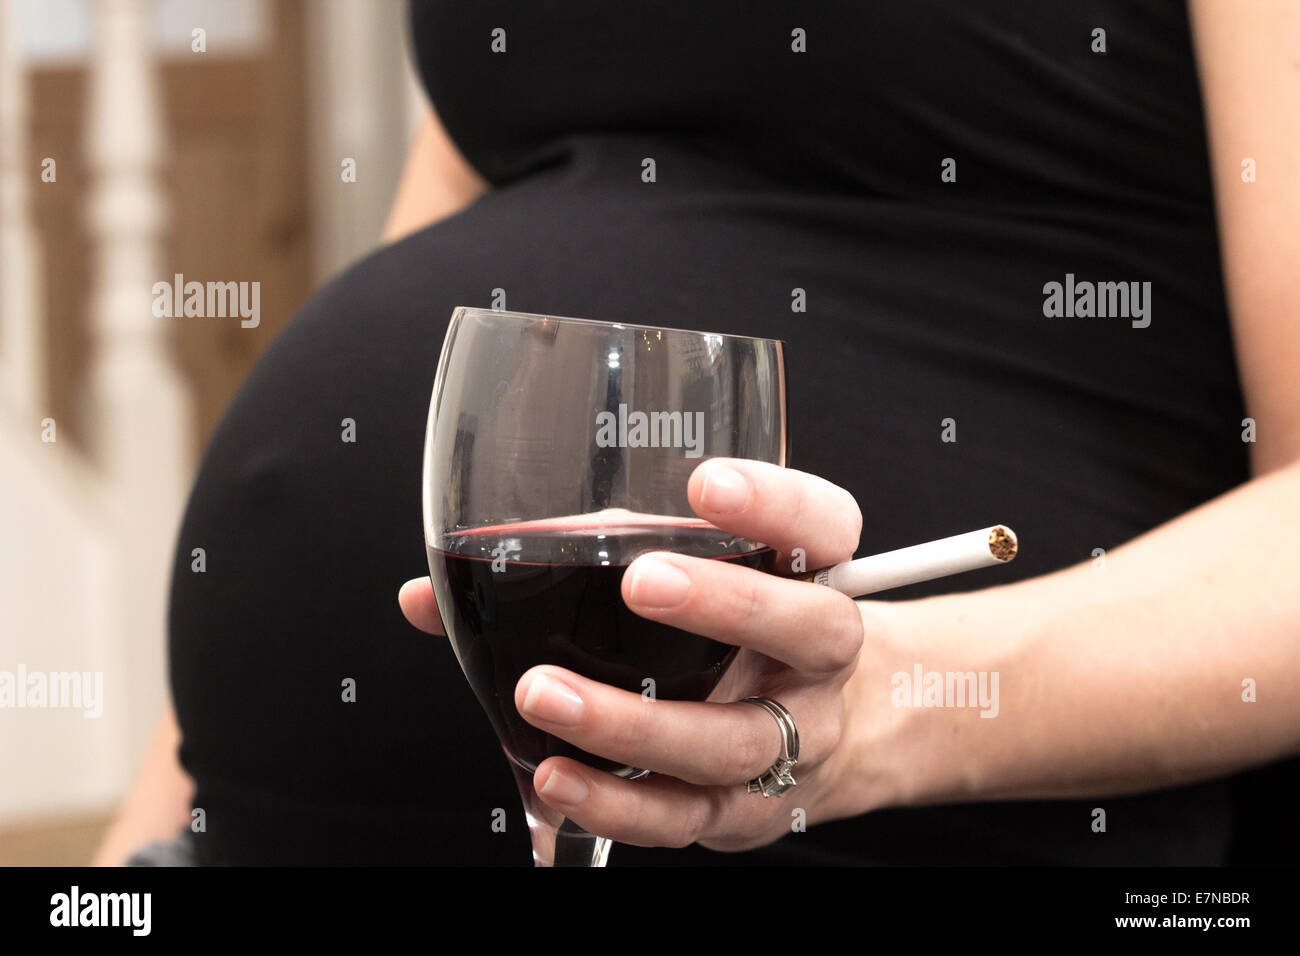 Pregnant woman holding a cigarette and glass of wine Stock Photo